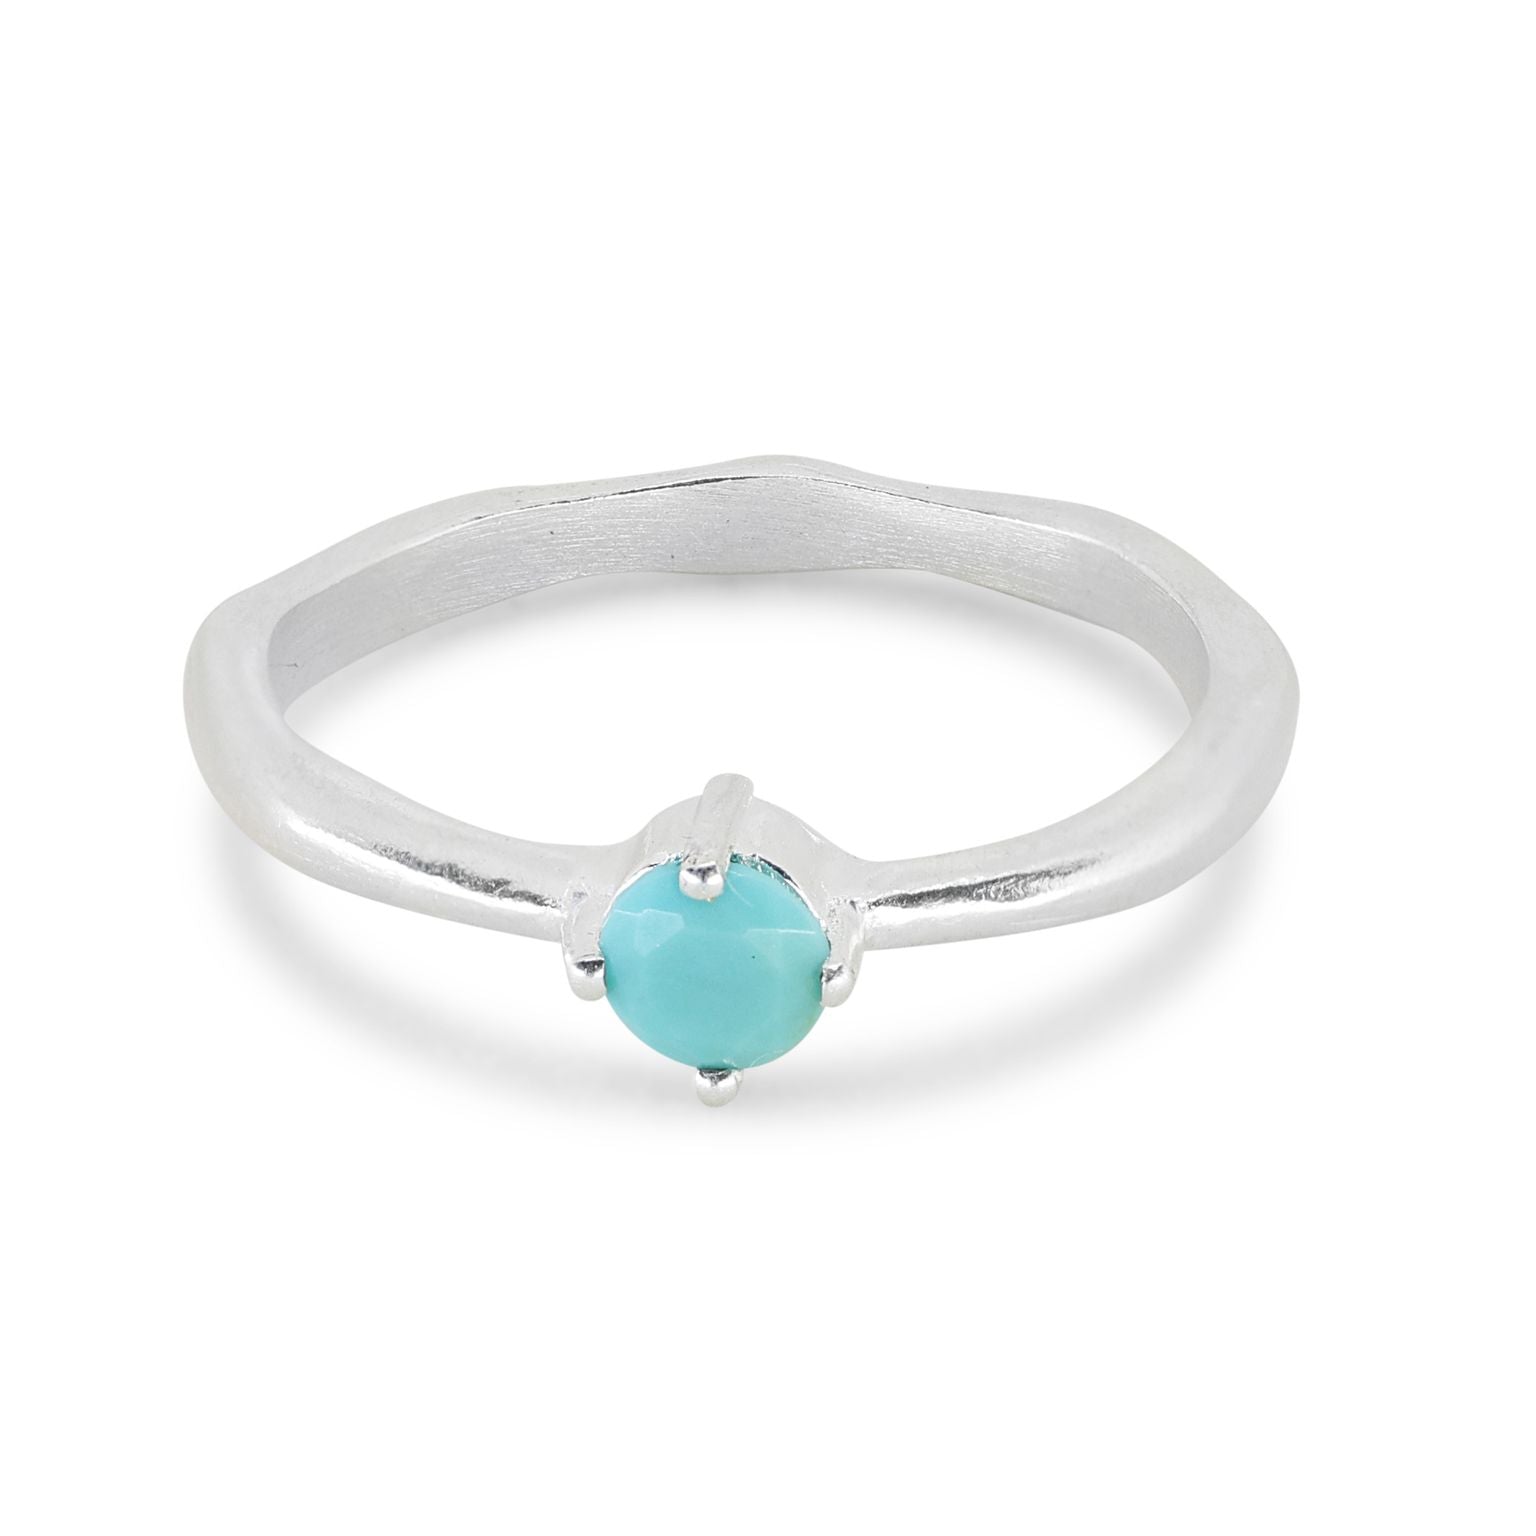 December Turquoise Silver Birthstone Ring